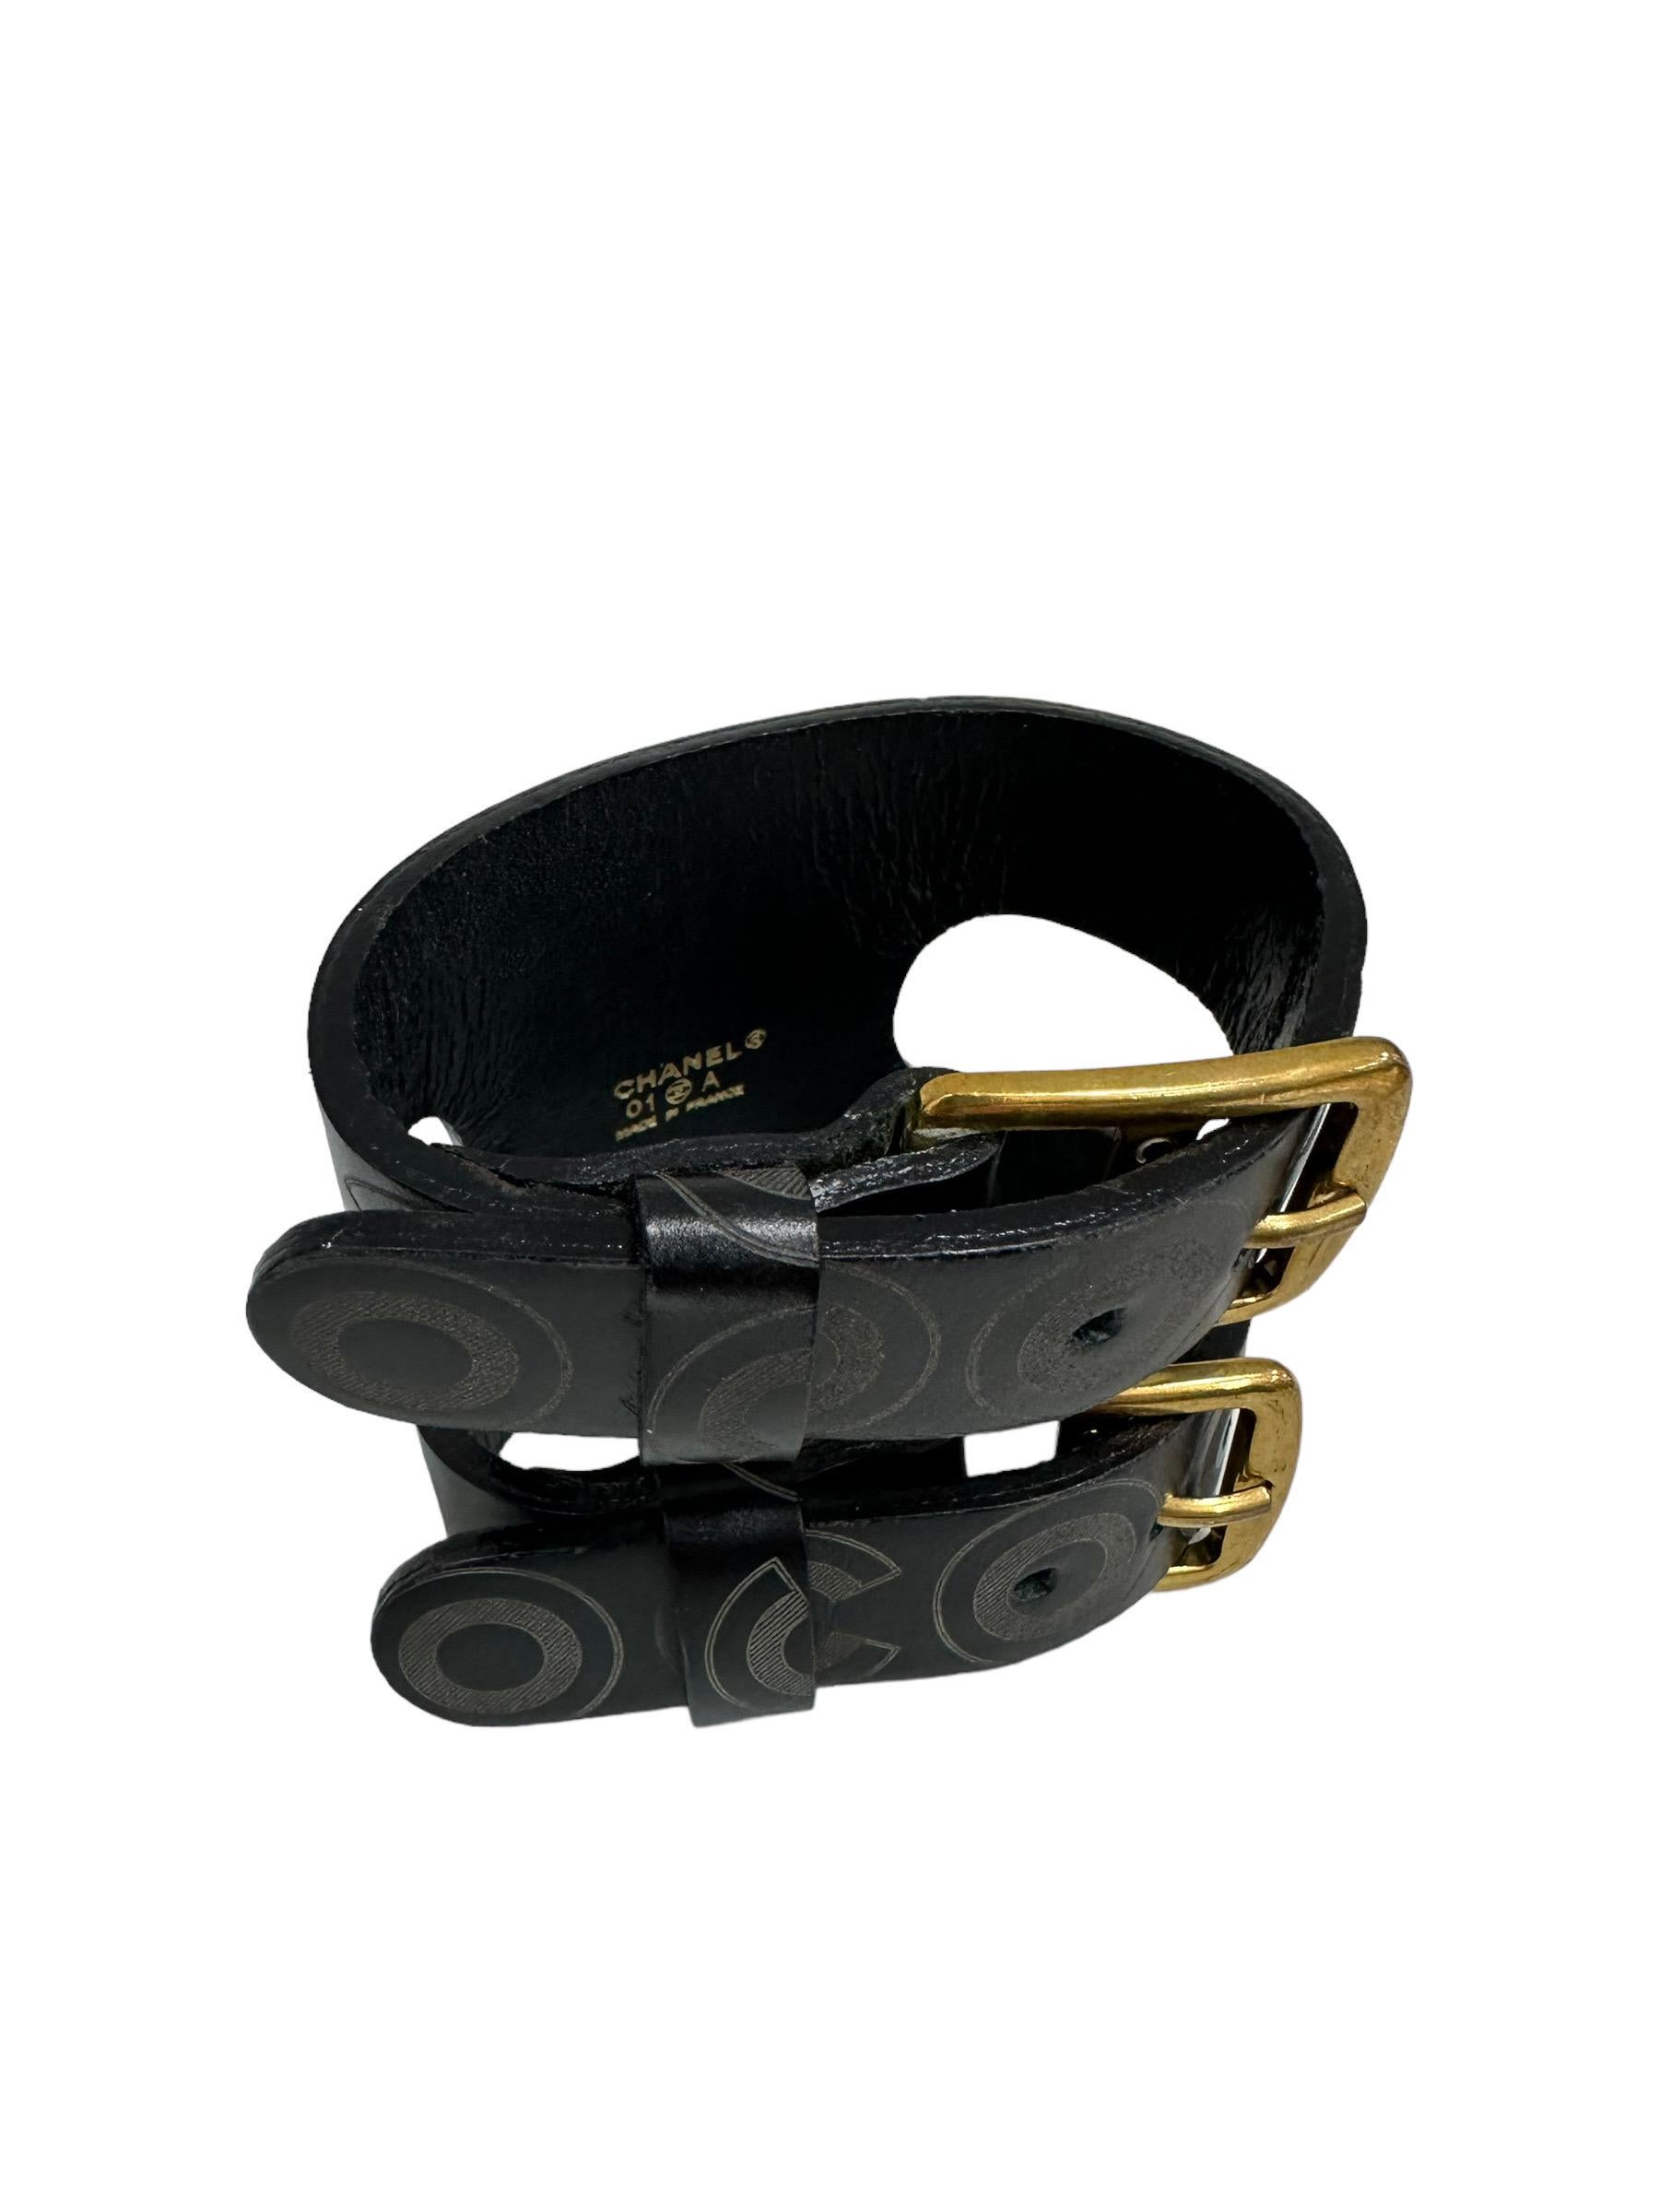 Chanel signed bracelet, Coco Print model, made in black leather with gold hardware. Equipped with an opening with two adjustable buckles. One size. It is presented in good condition.